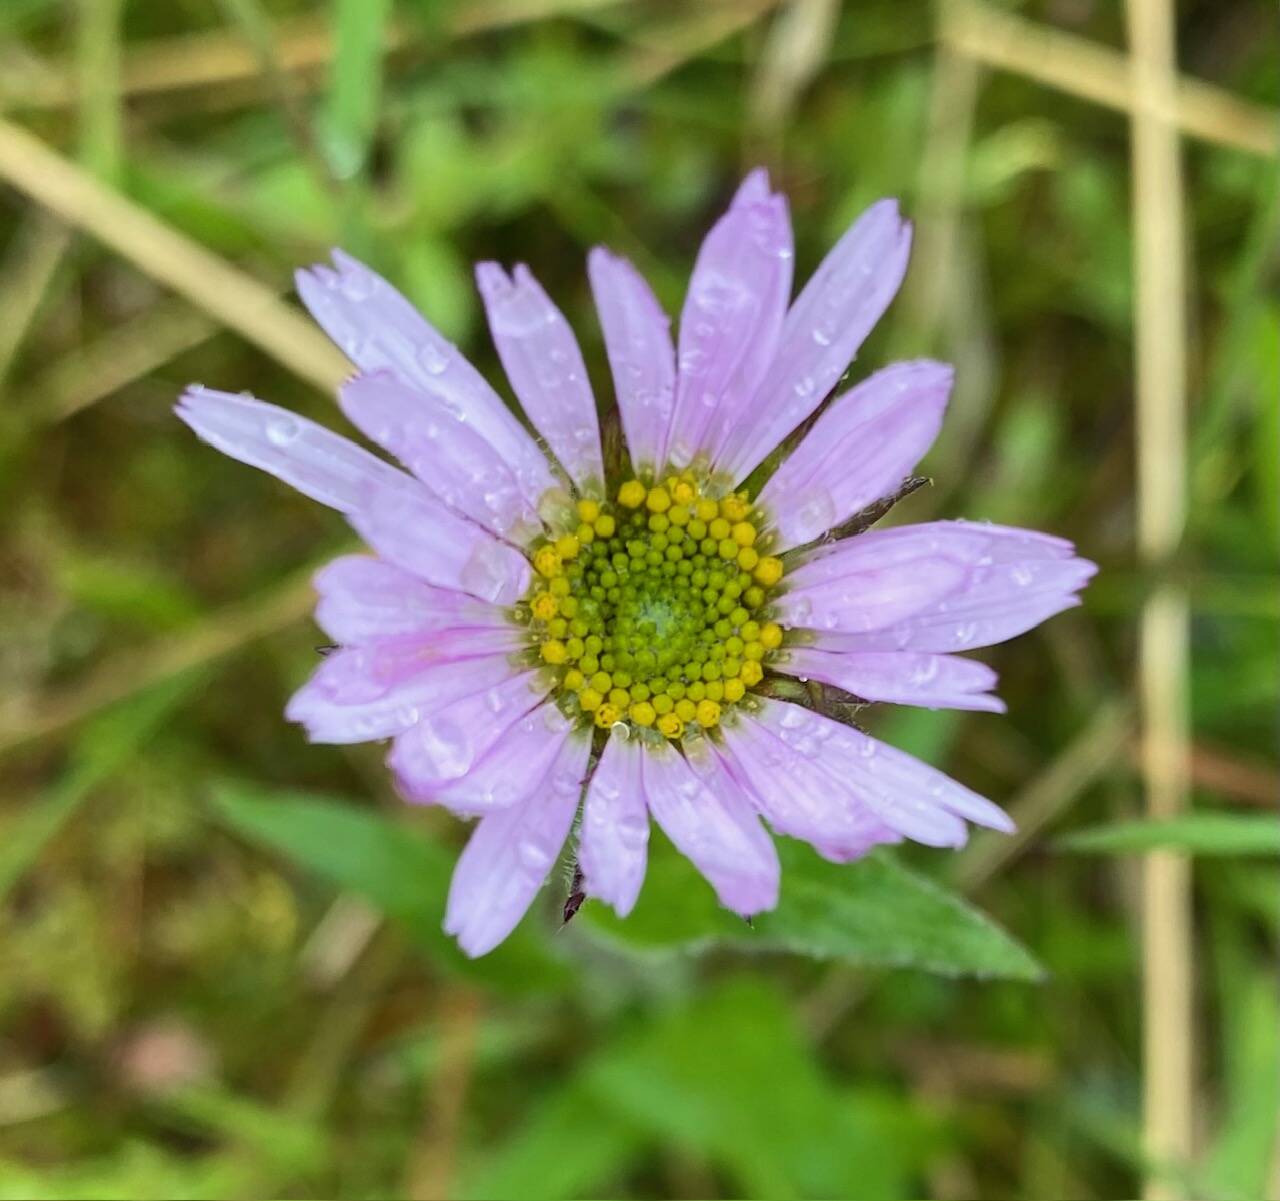 An Aster sprinkled with raindrops along the Herbert Glacier Trail on June 30. (Photo by Denise Cartoll)